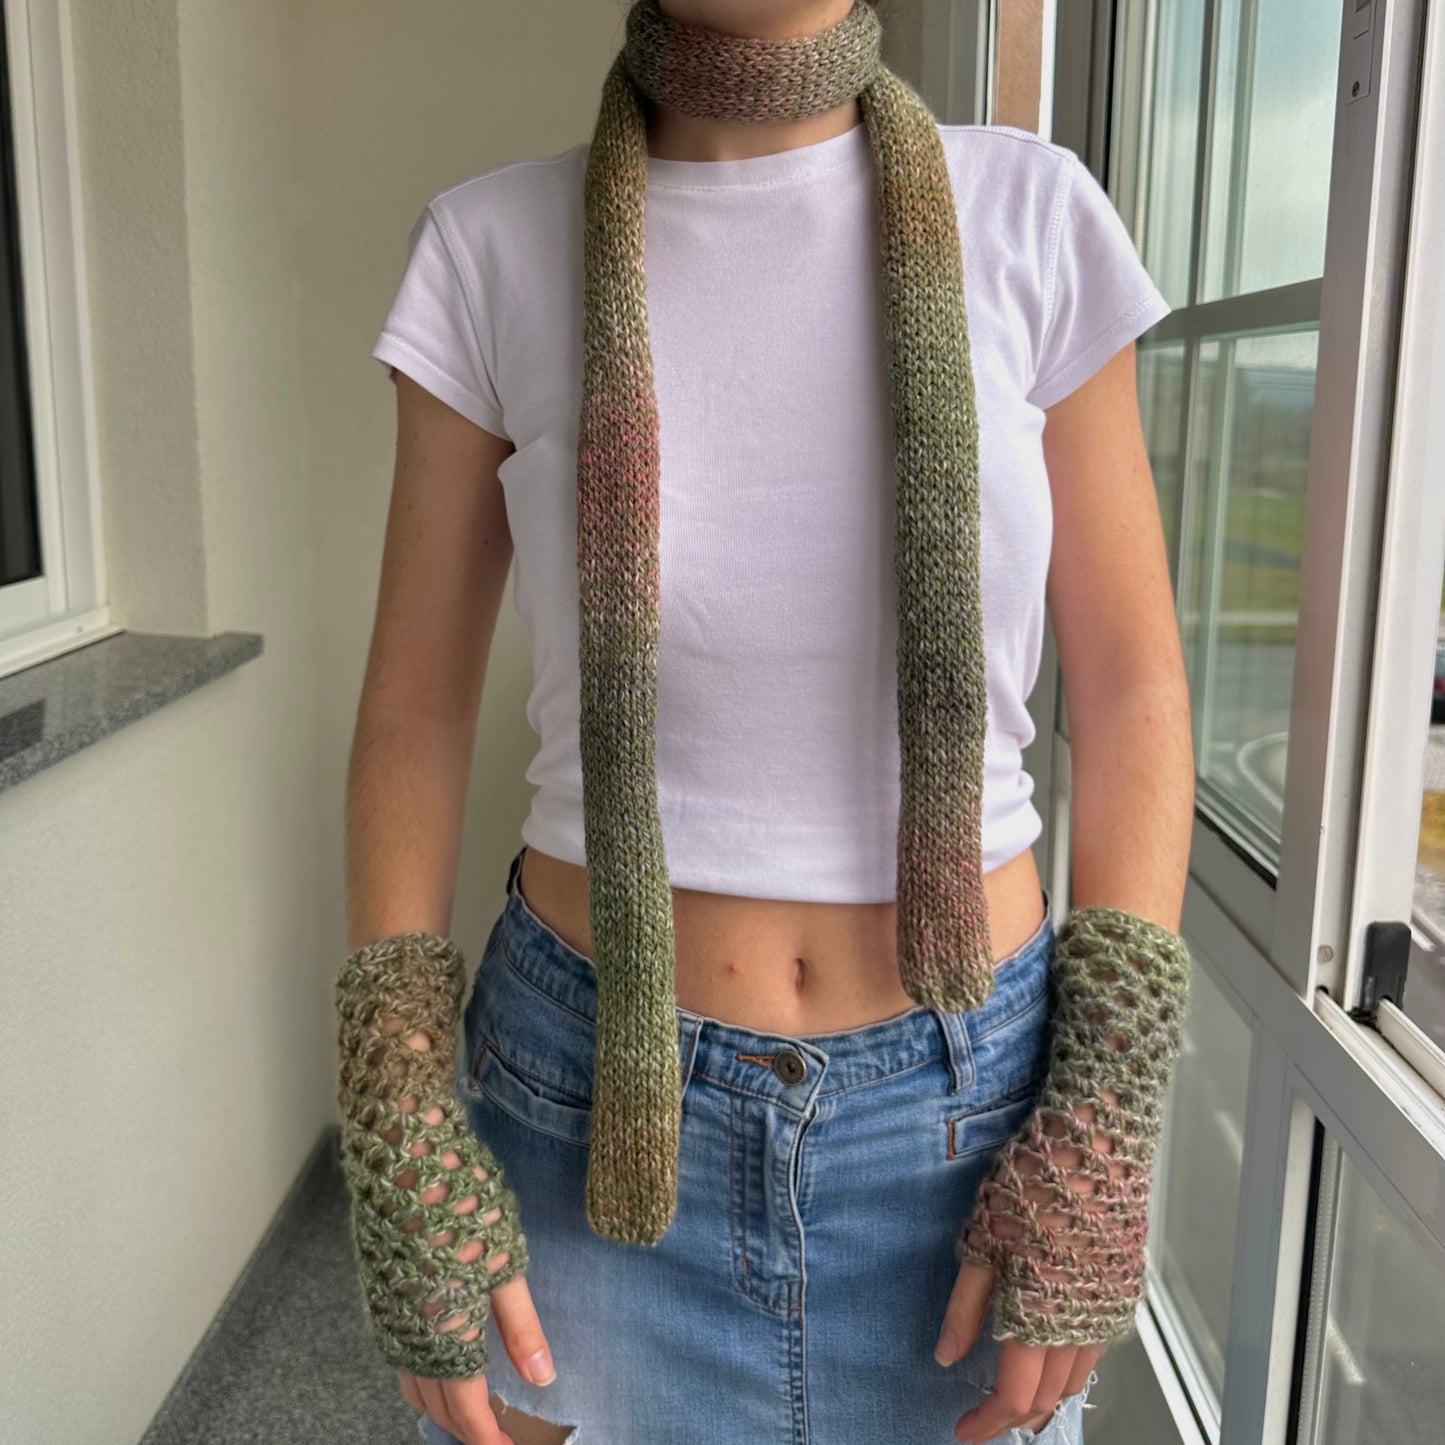 Handmade knitted ombré skinny scarf in dusky pink and green